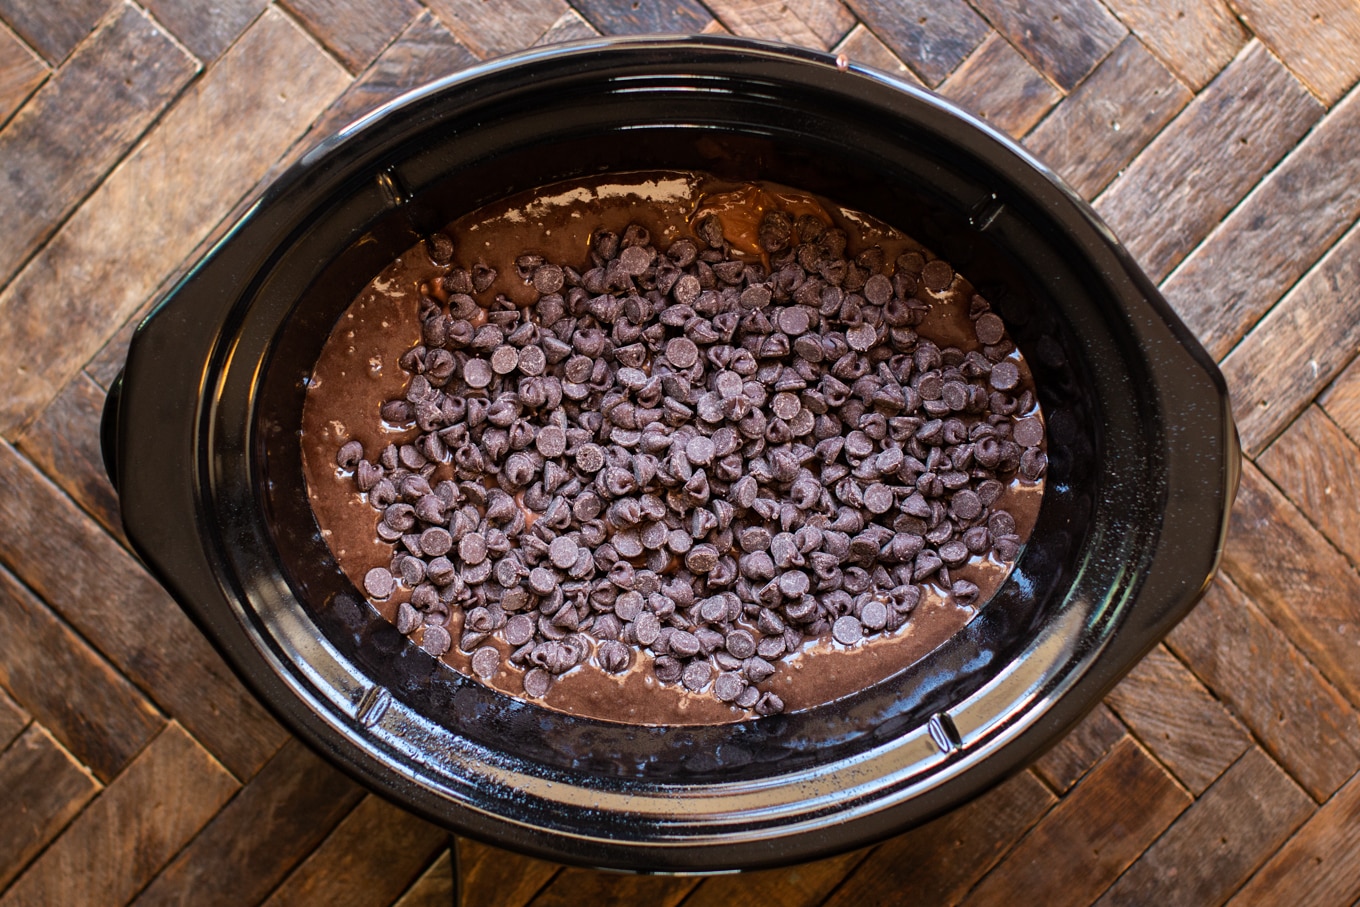 uncooked batter, pudding and chocolate chips in slow cooker